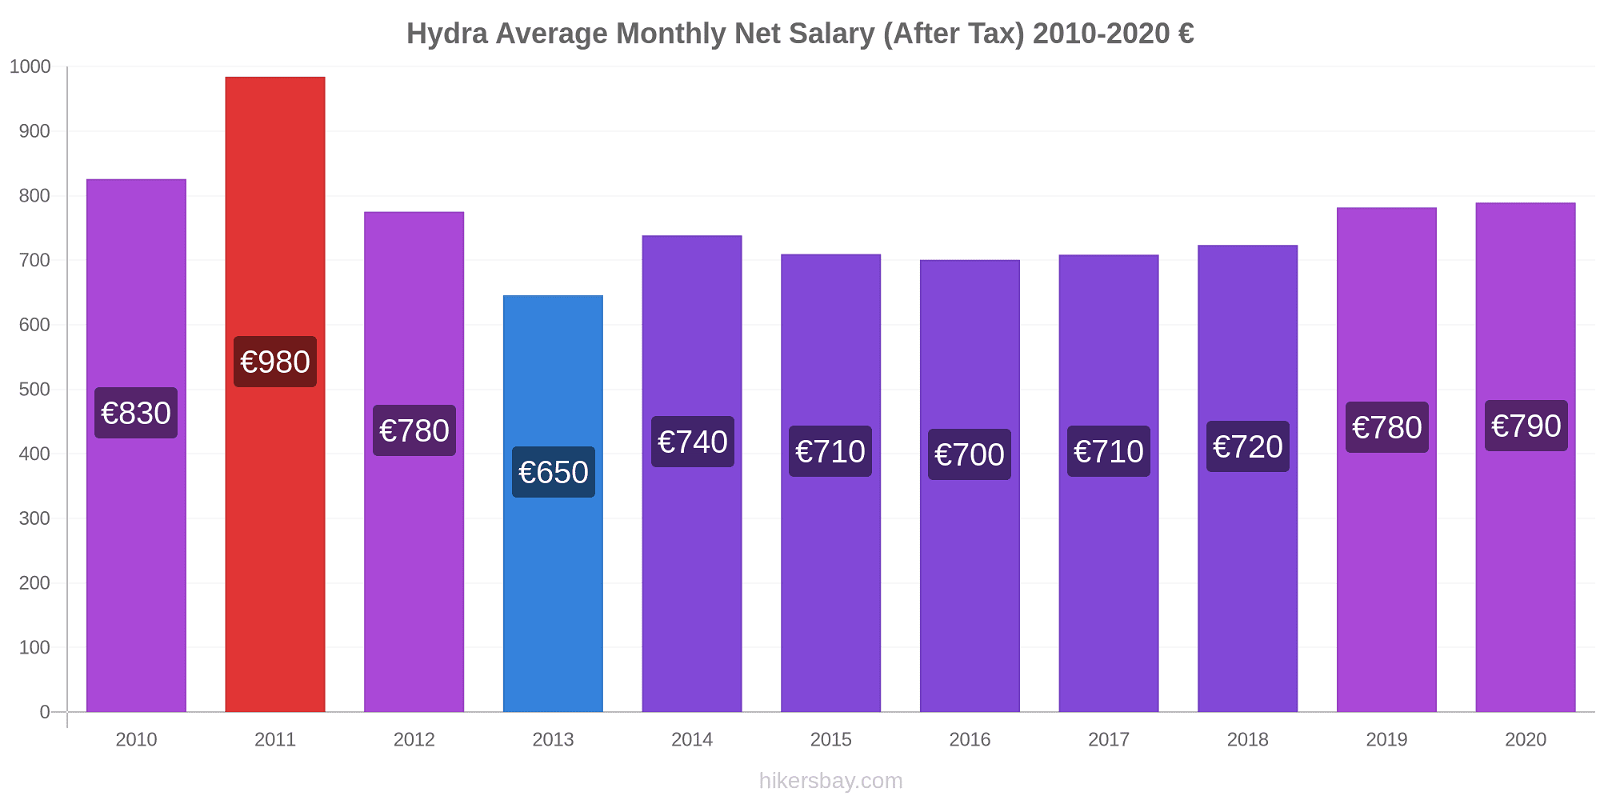 Hydra price changes Average Monthly Net Salary (After Tax) hikersbay.com